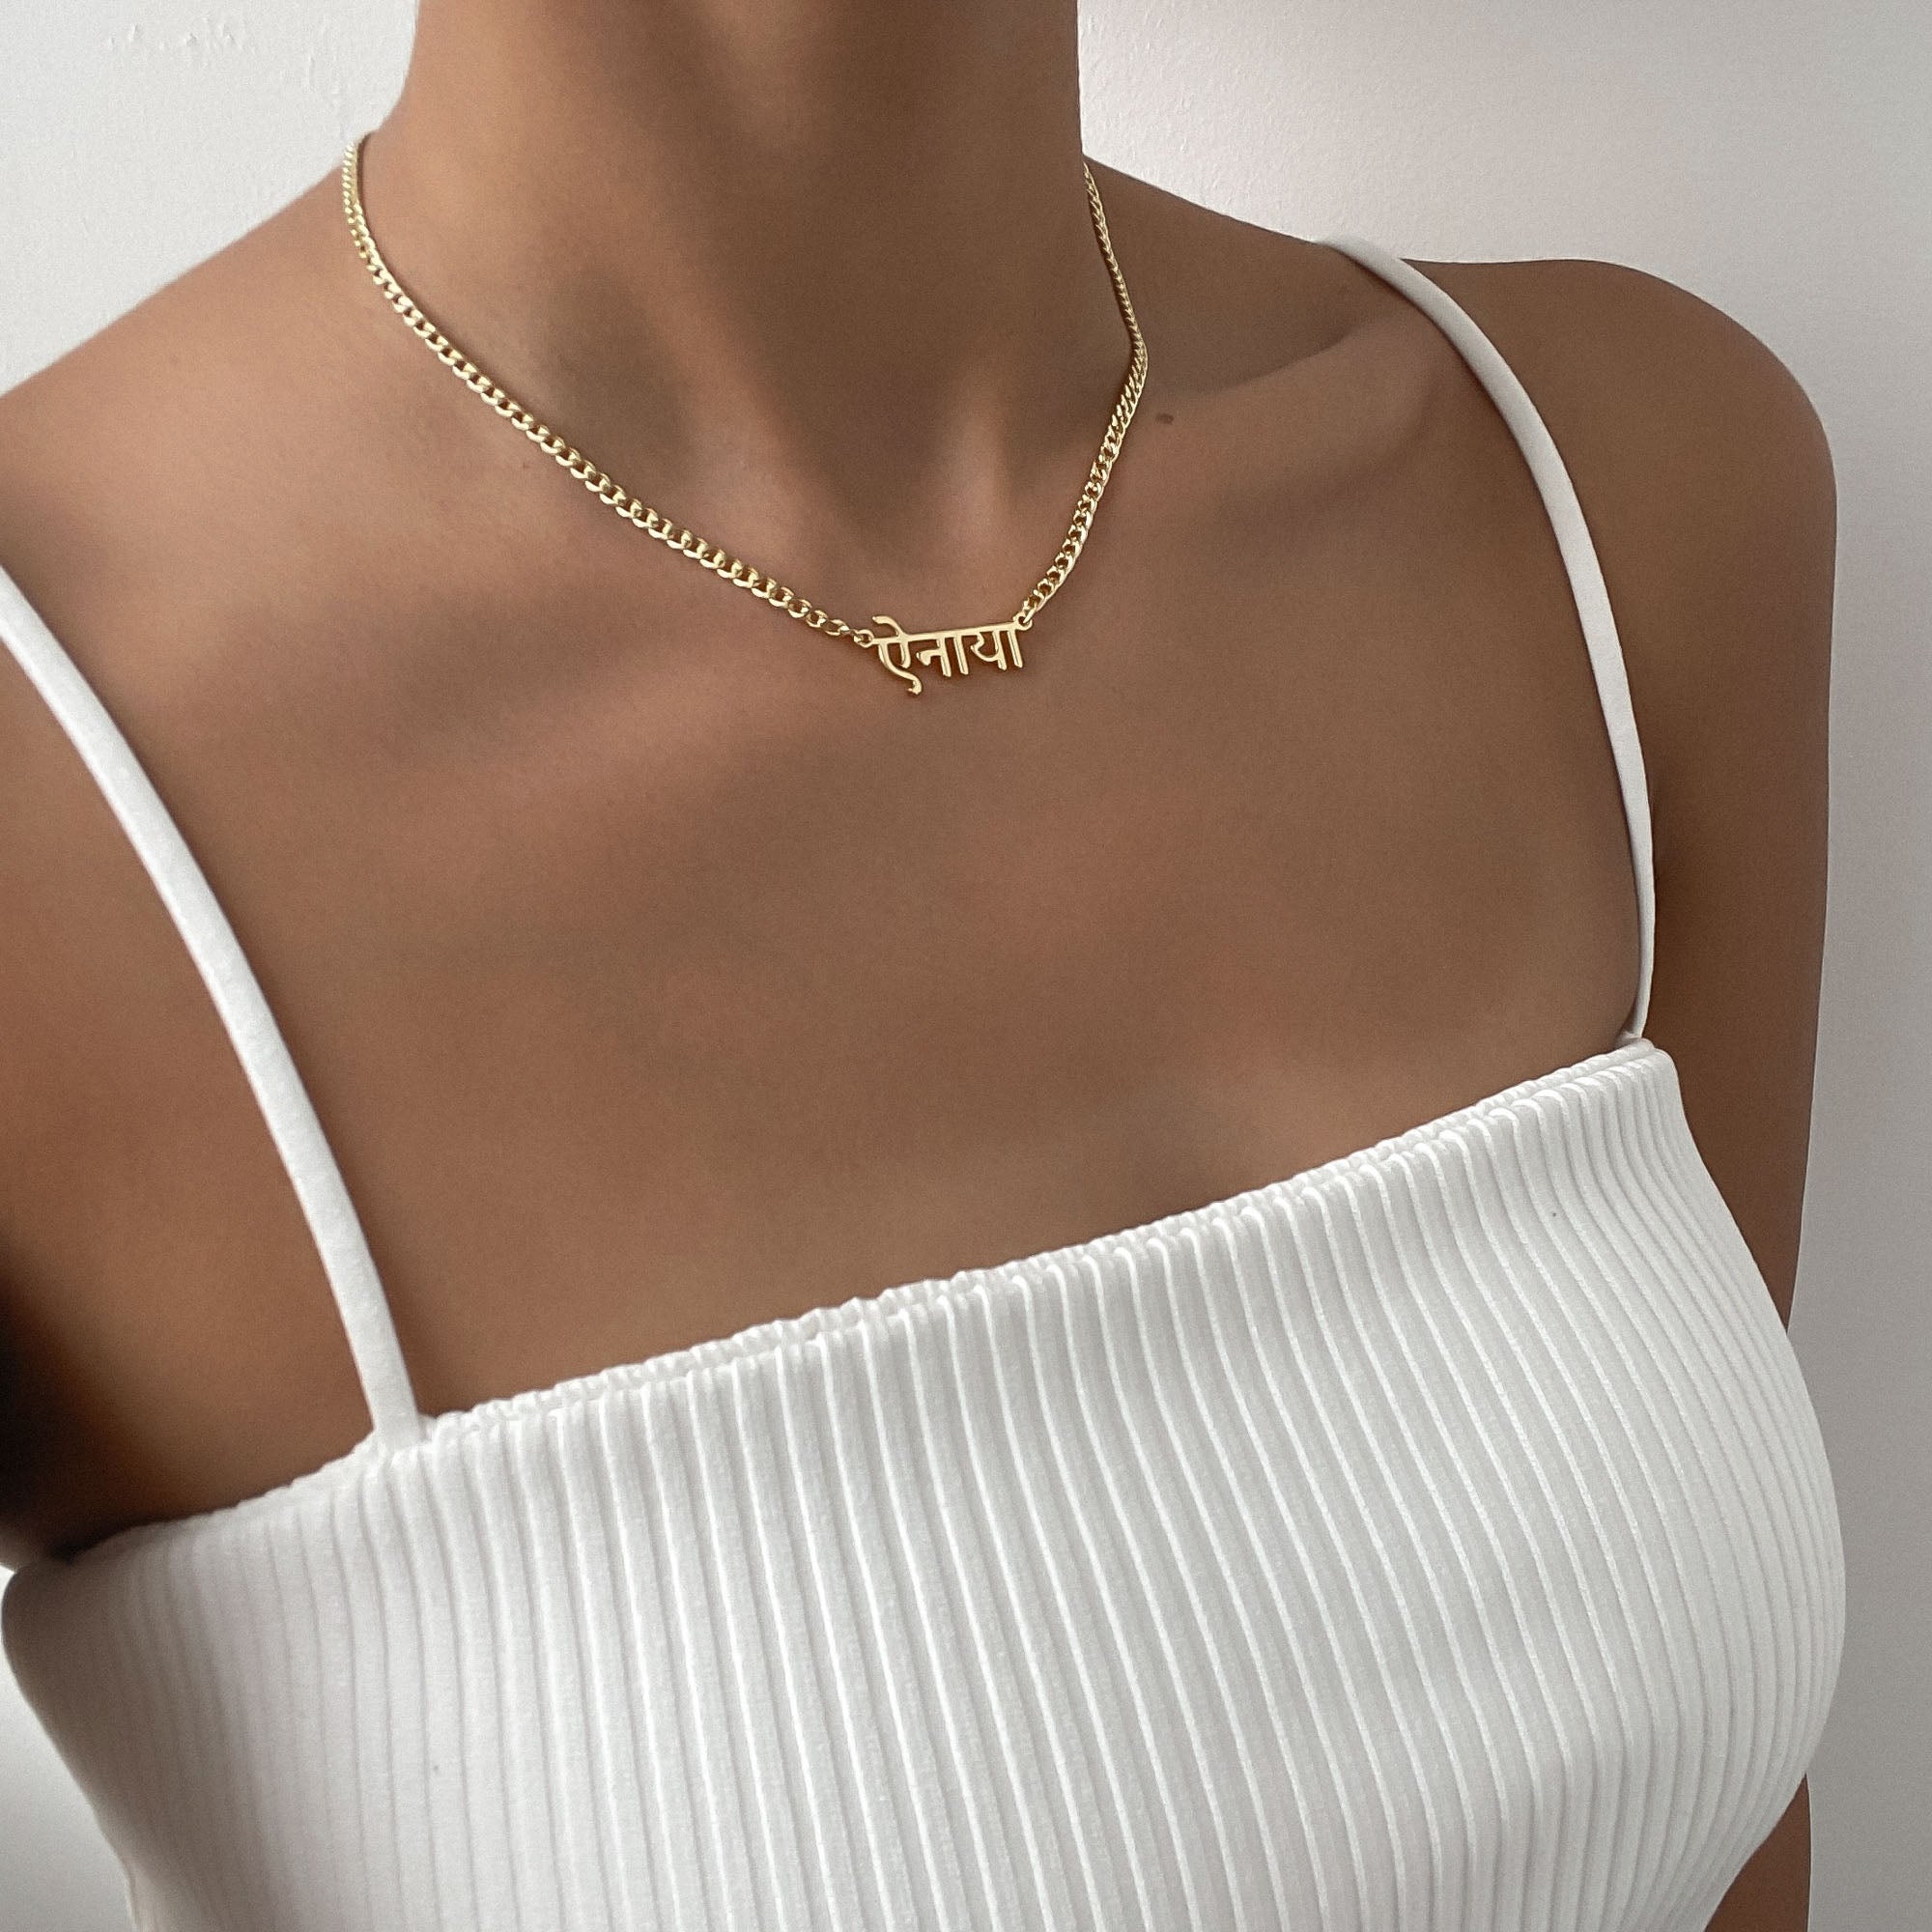 View of a woman’s chest wearing a white strappy top and a gold Hindi name necklace